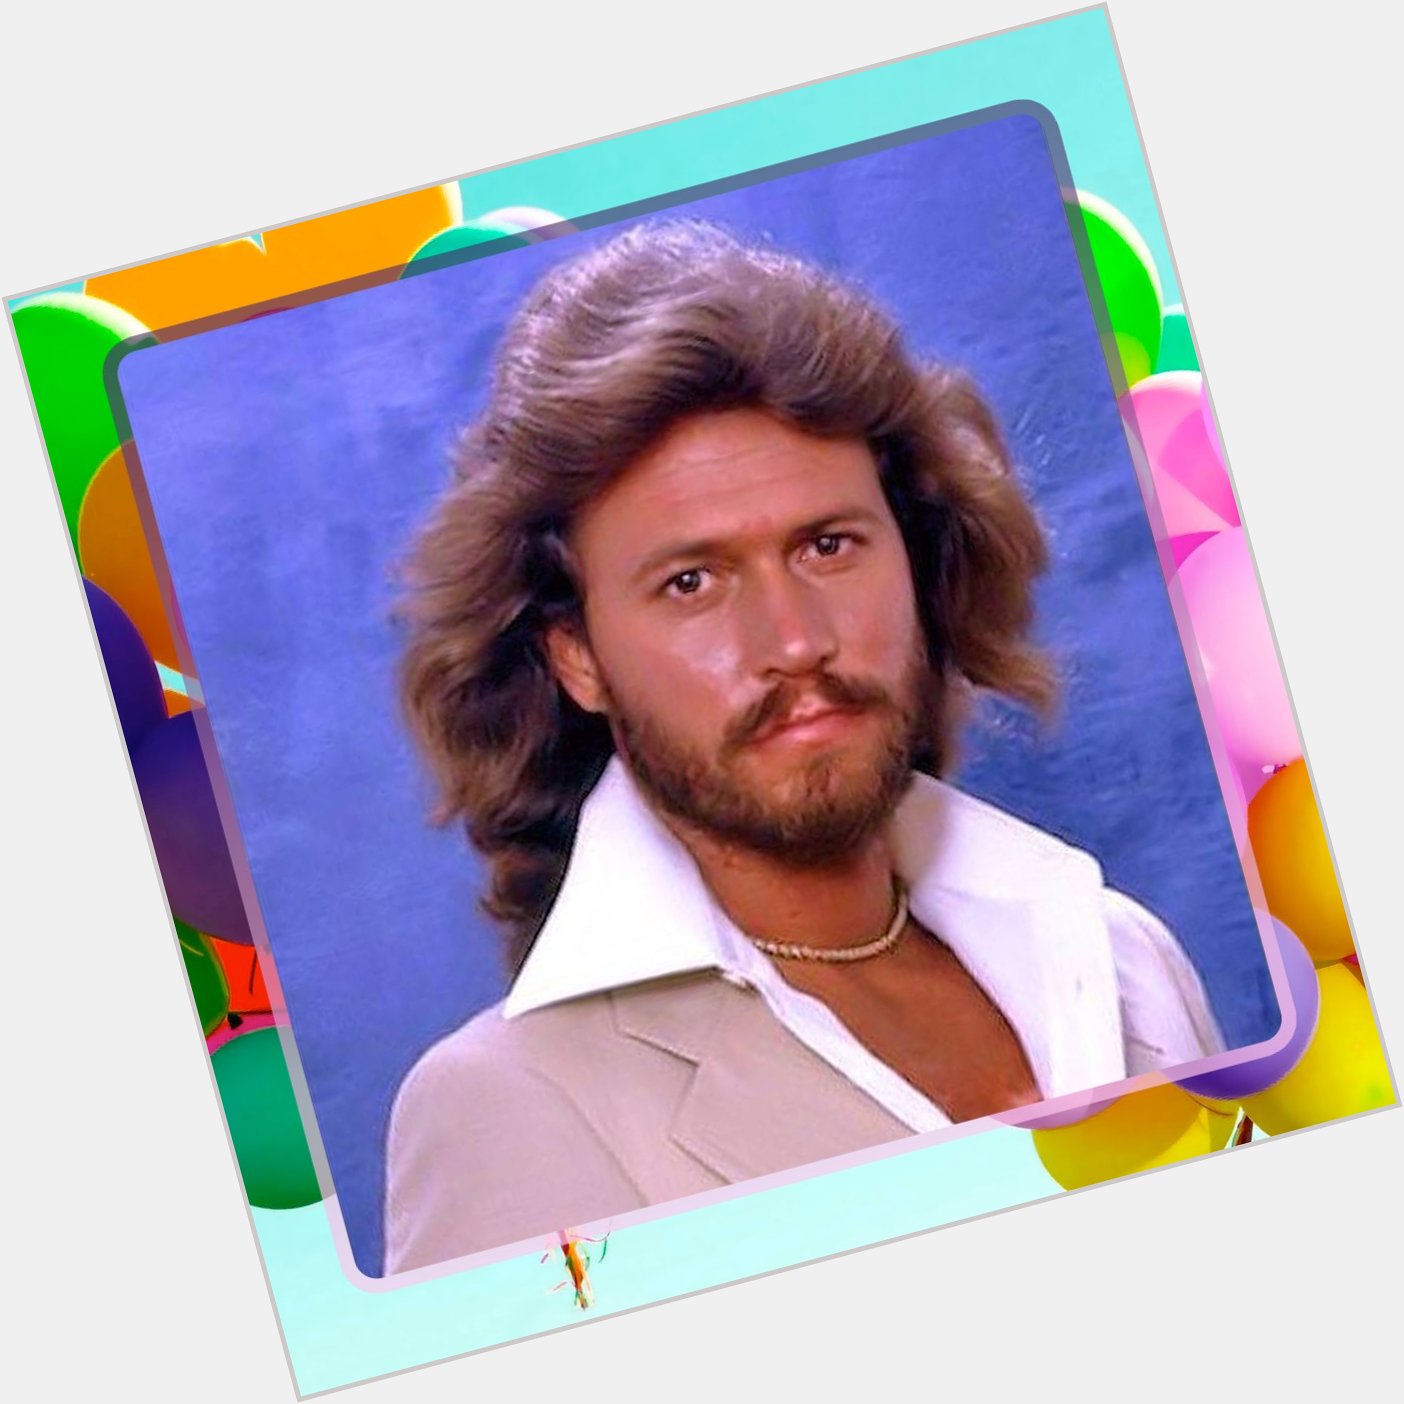 Happy Birthday Barry Gibb! 

Which track is your favourite?? 